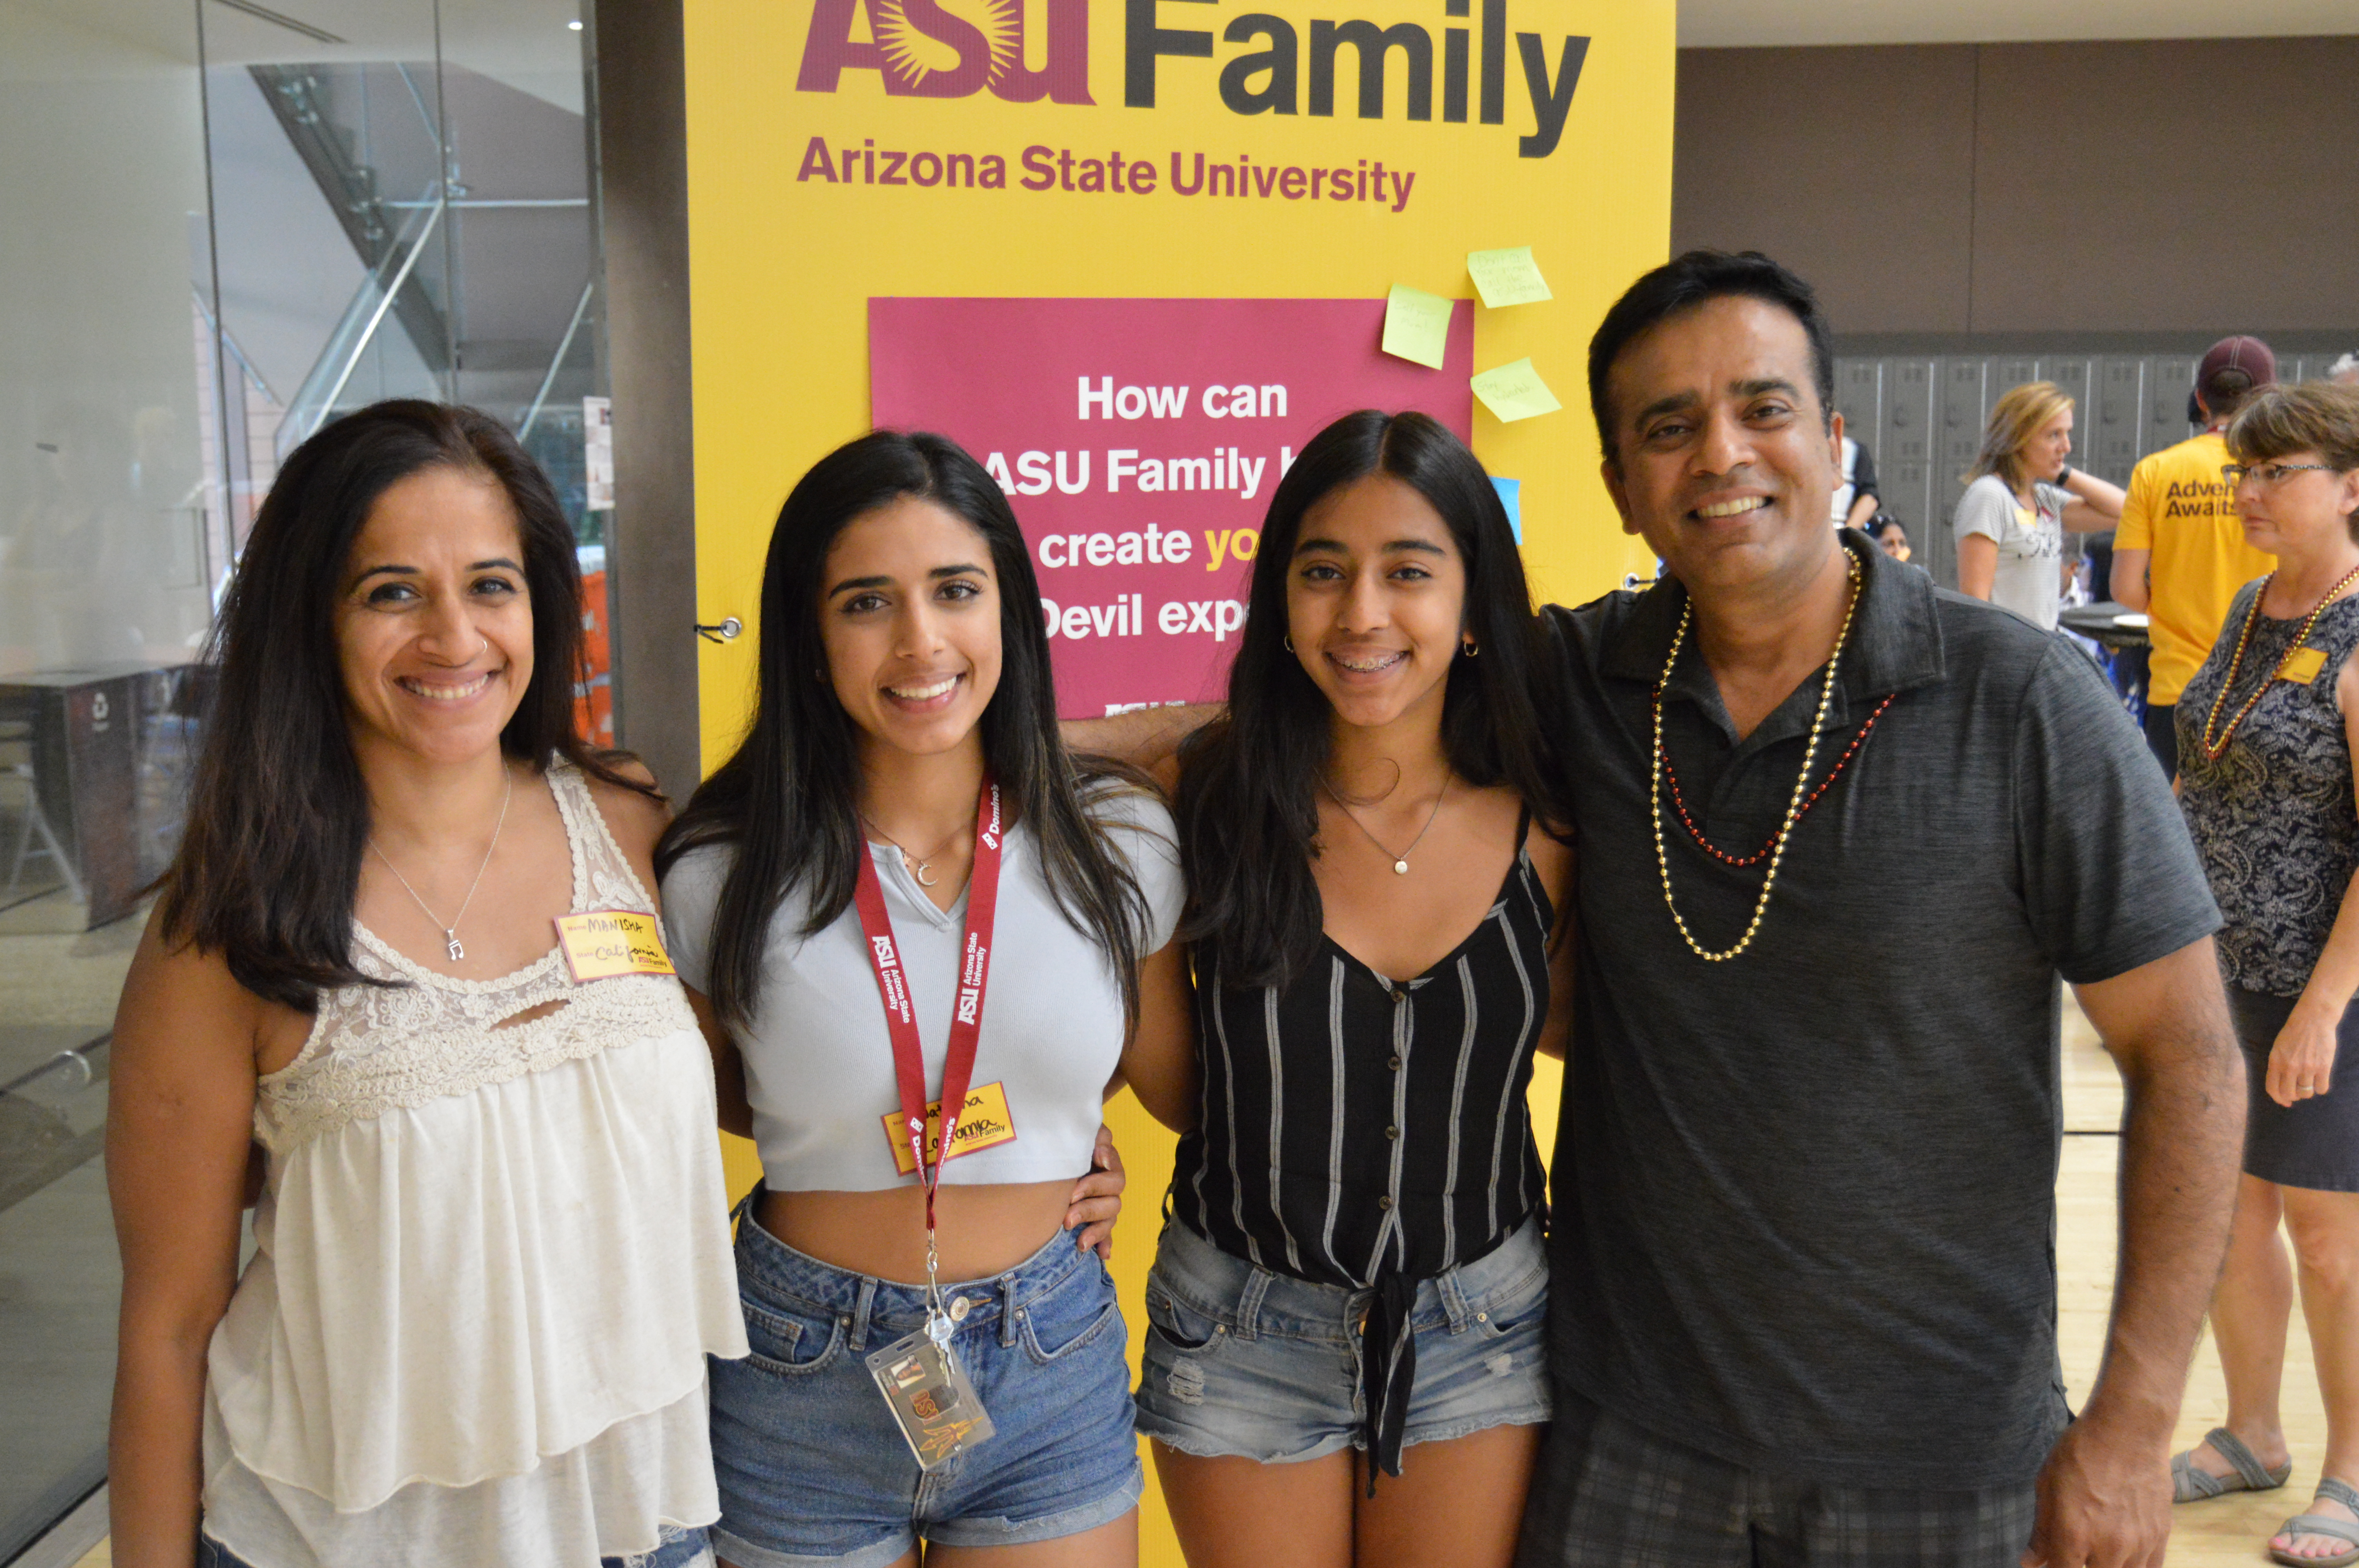 Four family members pose at an ASU Family welcome event